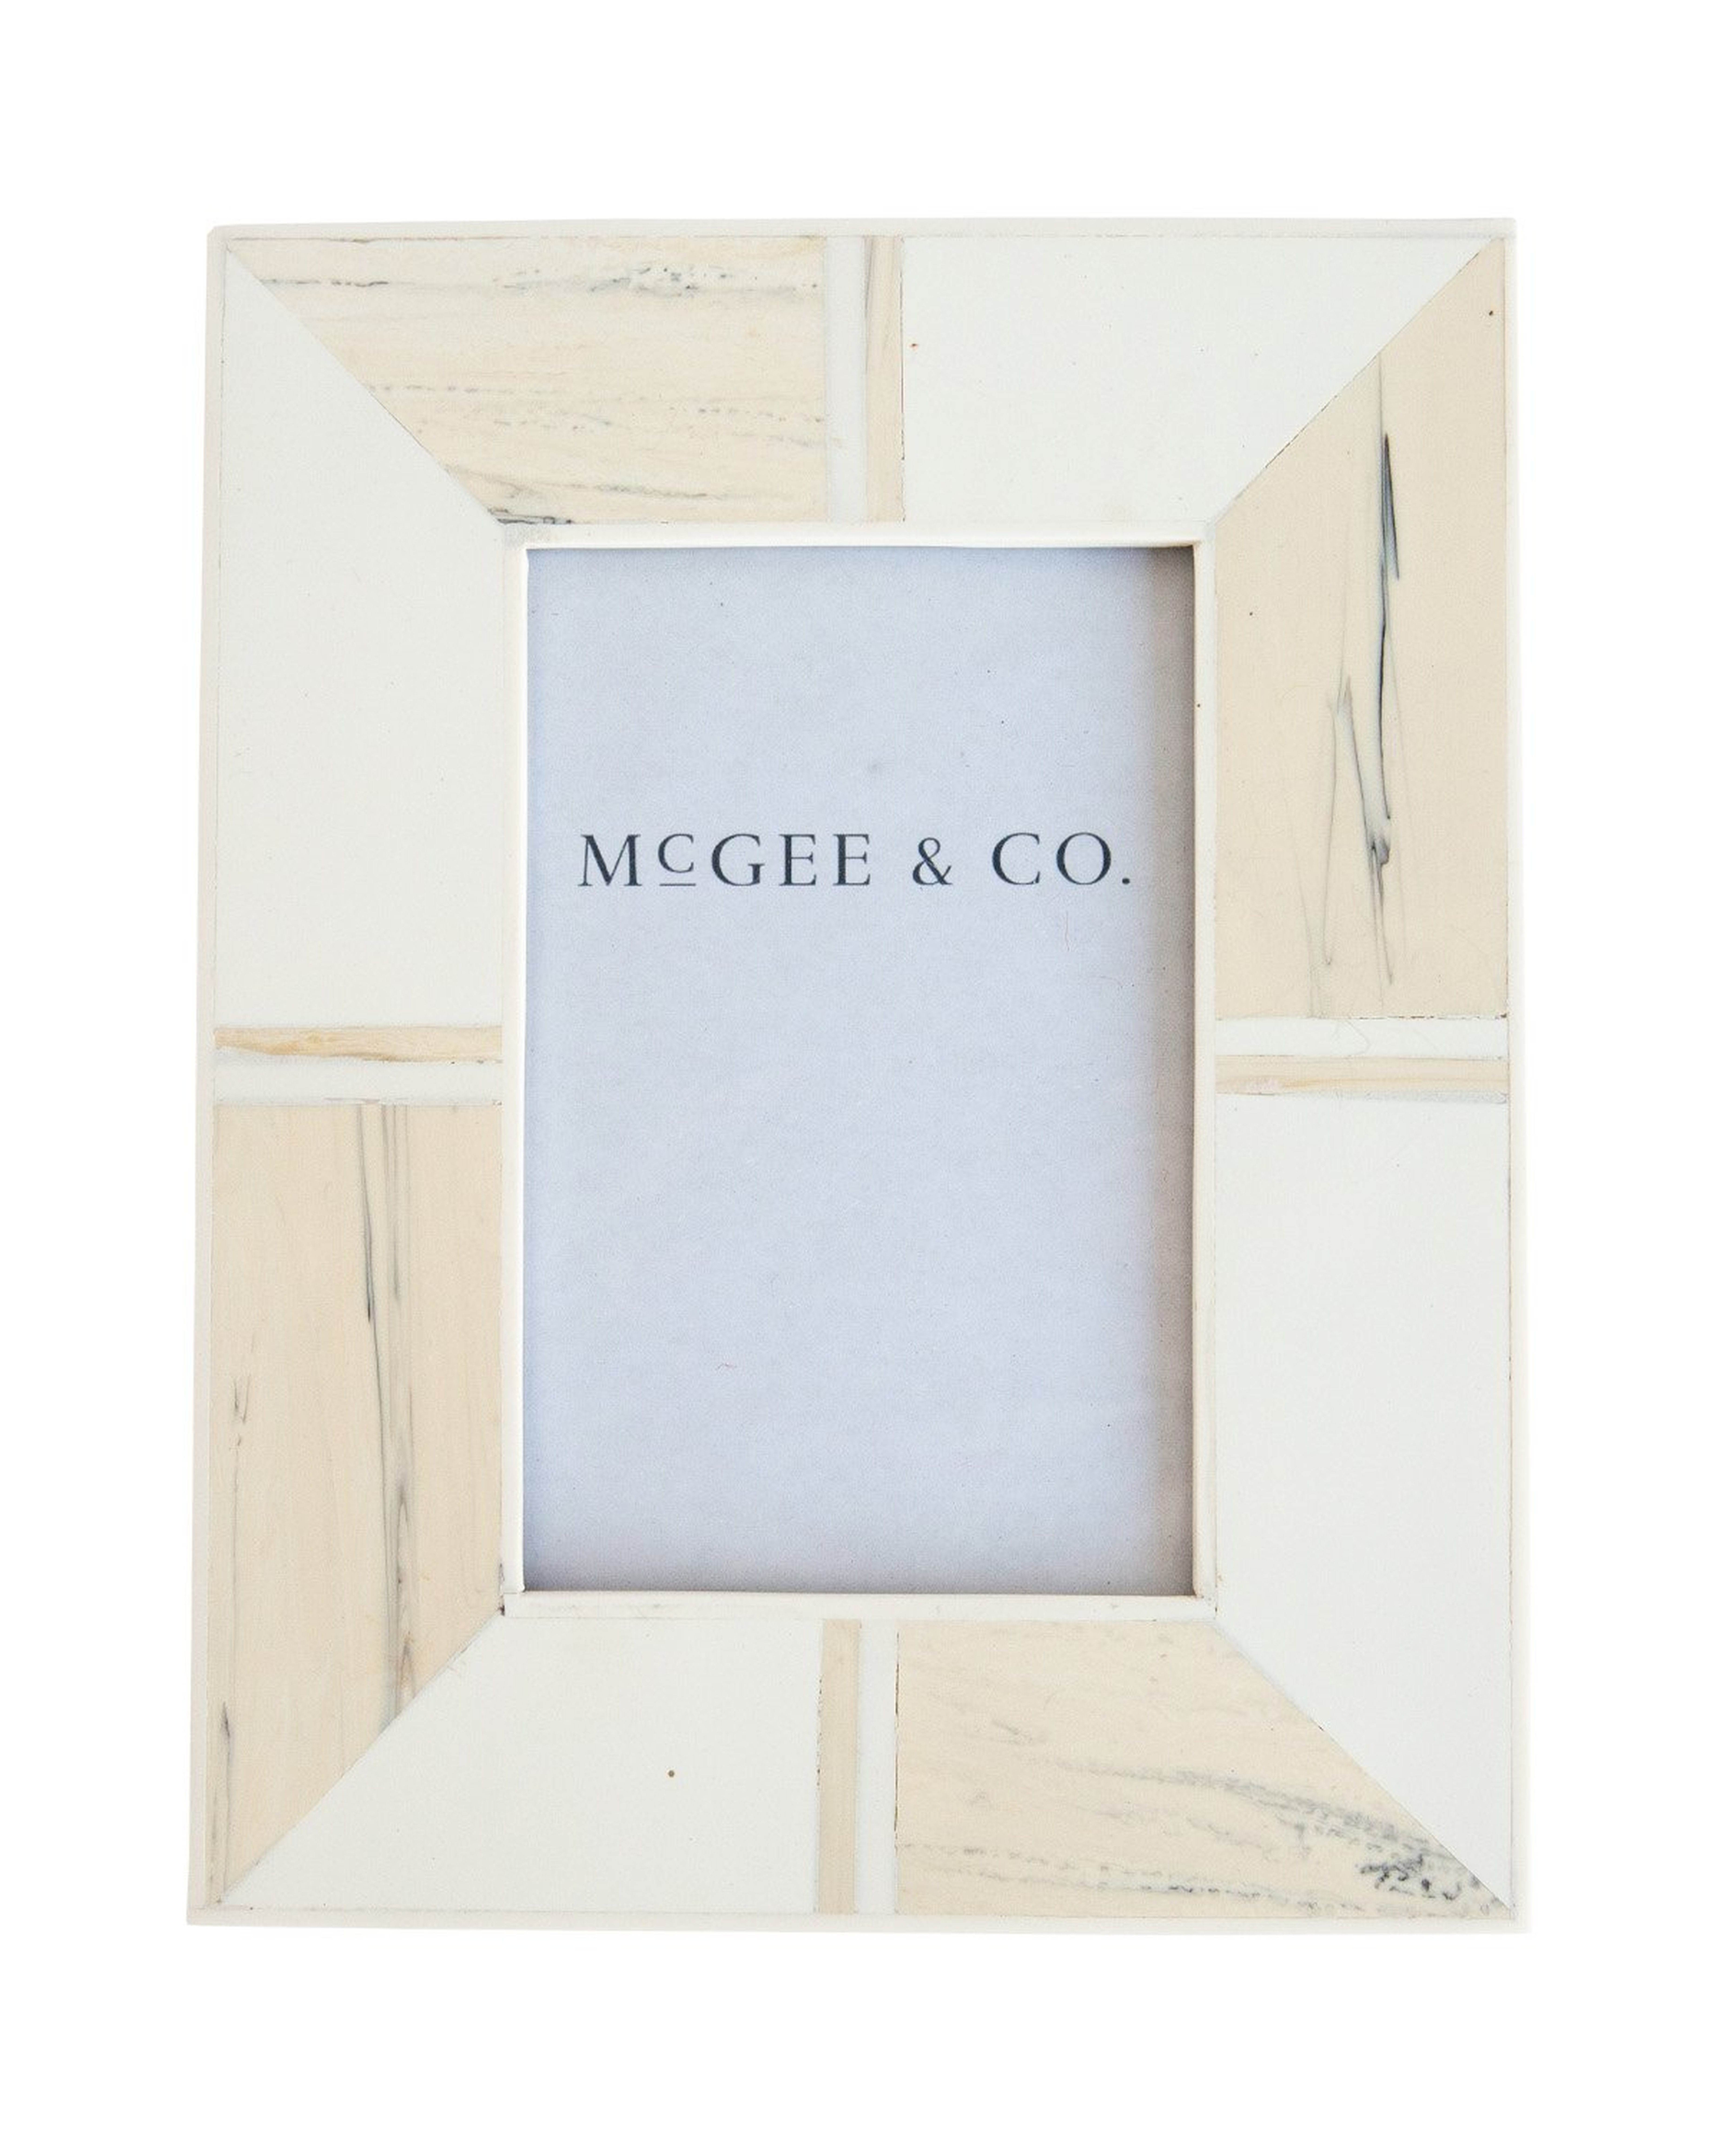 MARBLE TILED FRAME - 4" x 6" - McGee & Co.